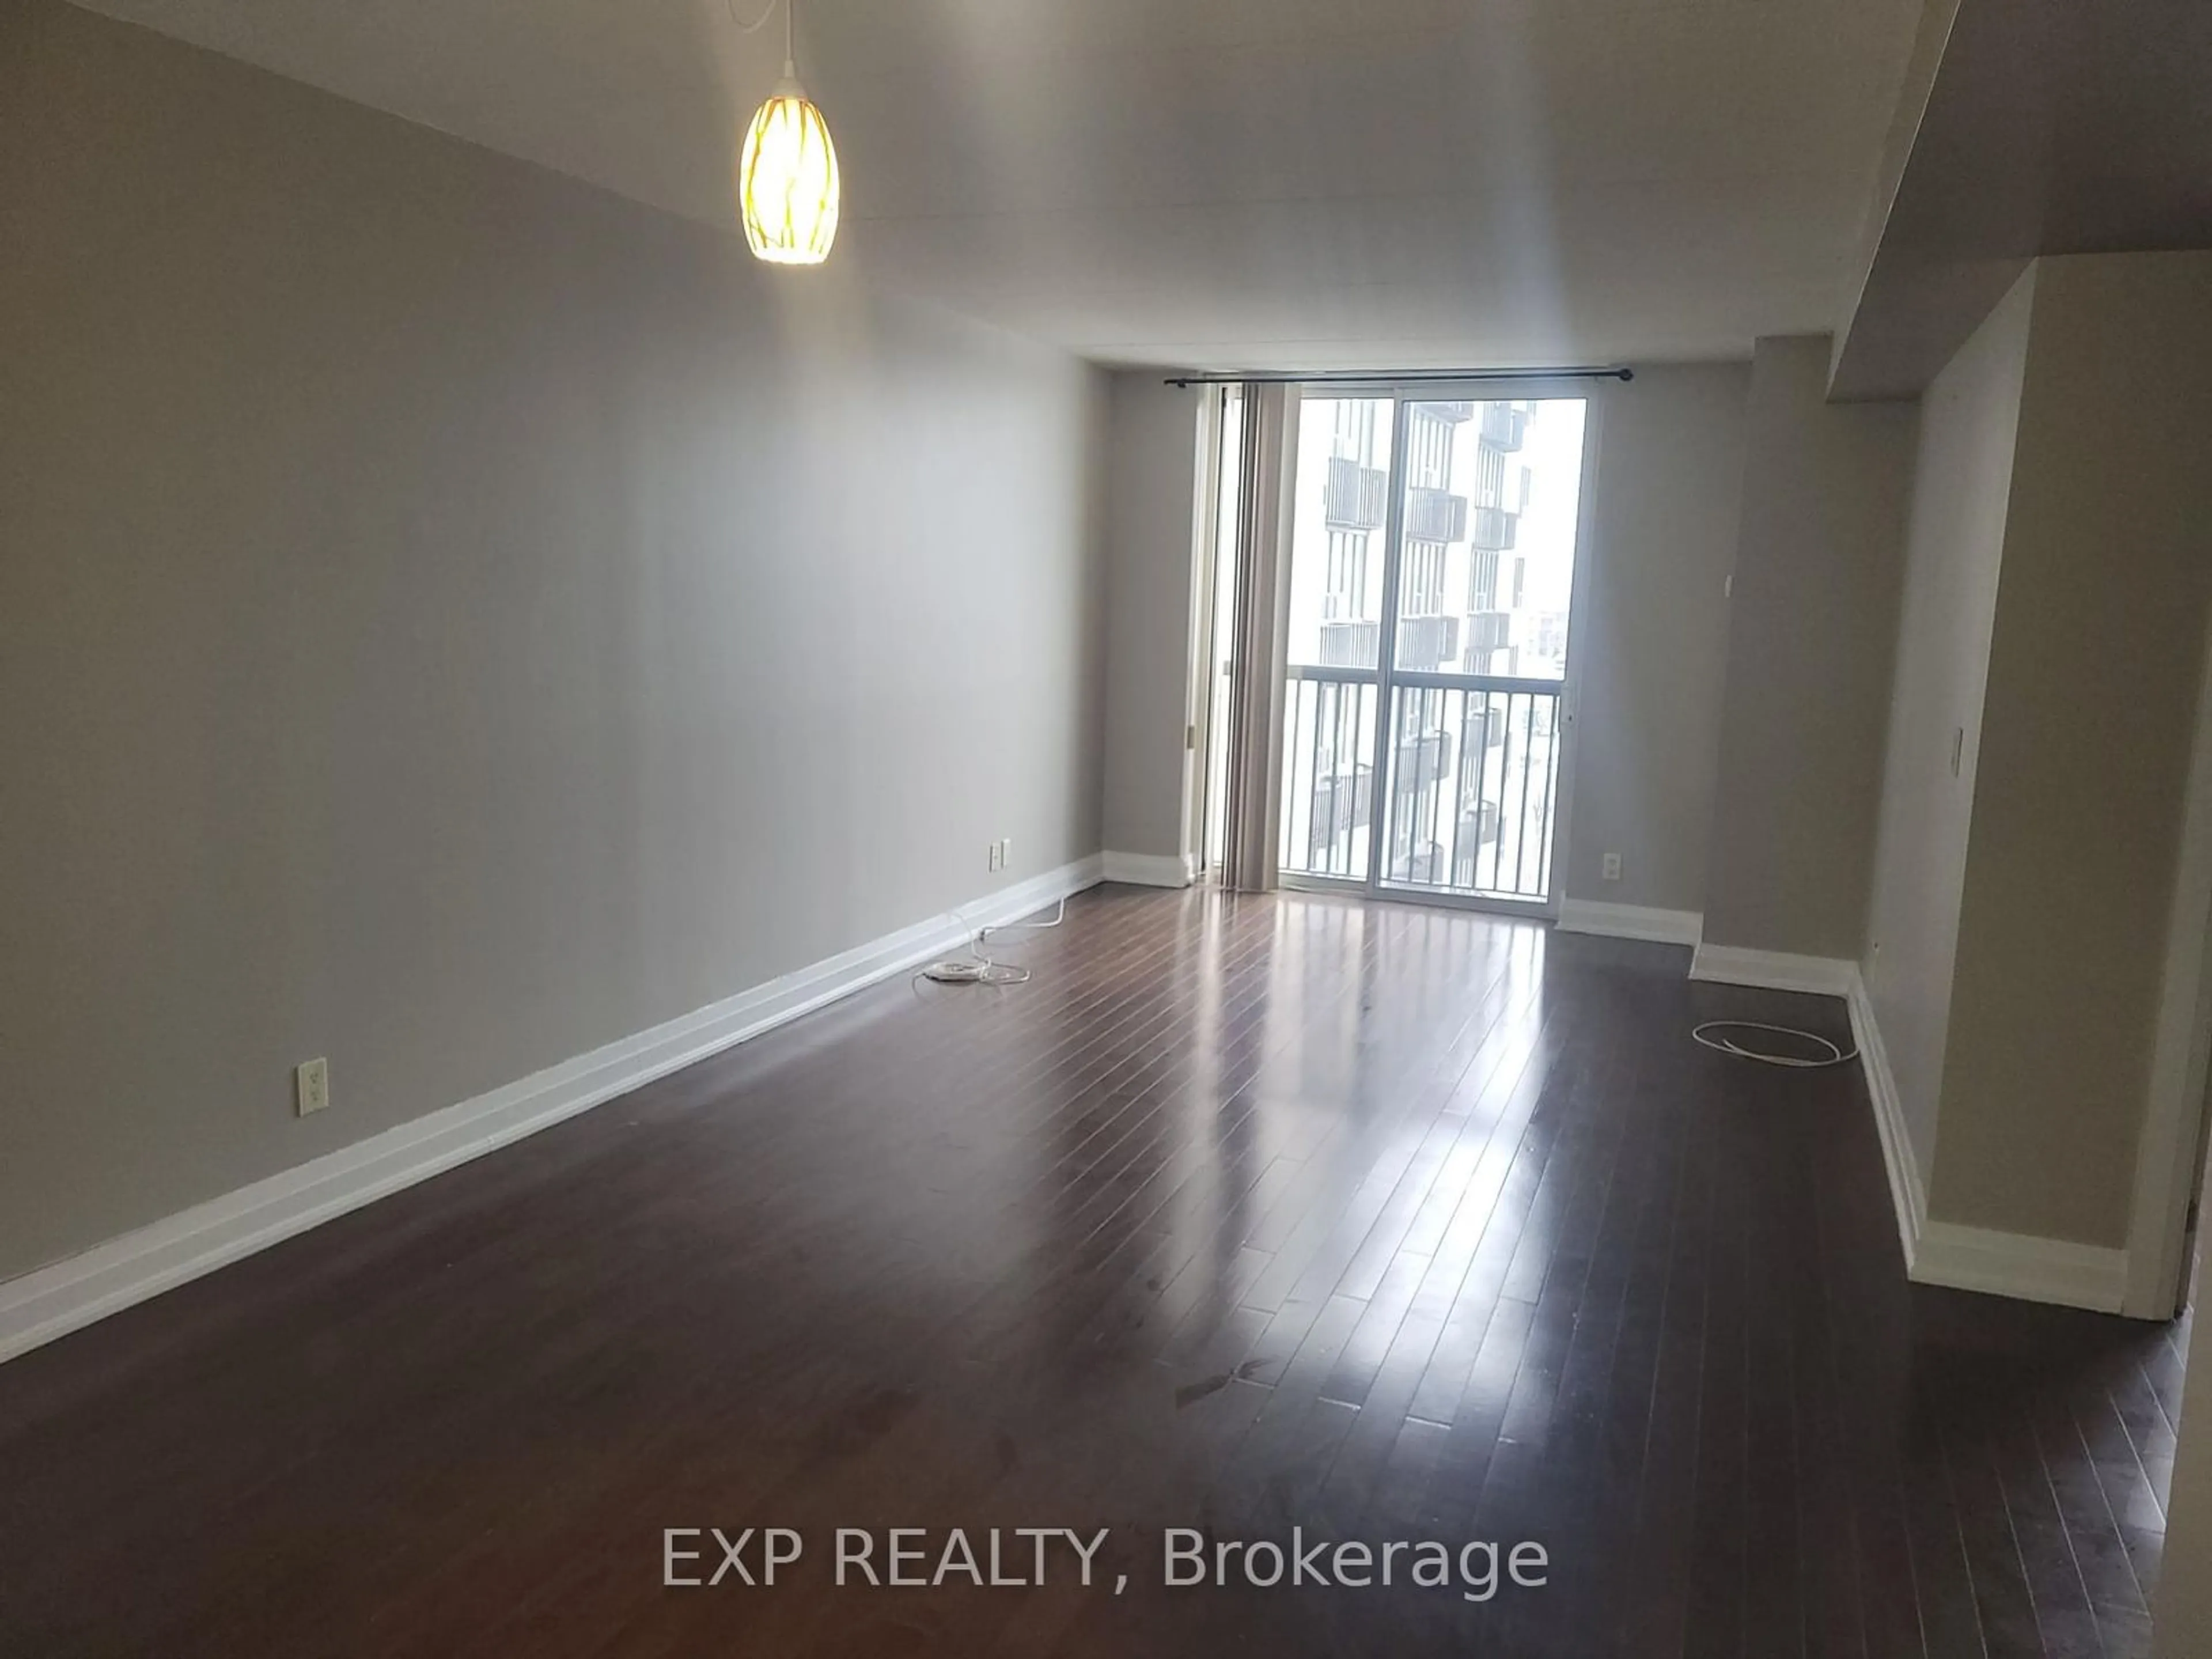 A pic of a room for 2737 keele St #703, Toronto Ontario M3M 2E9